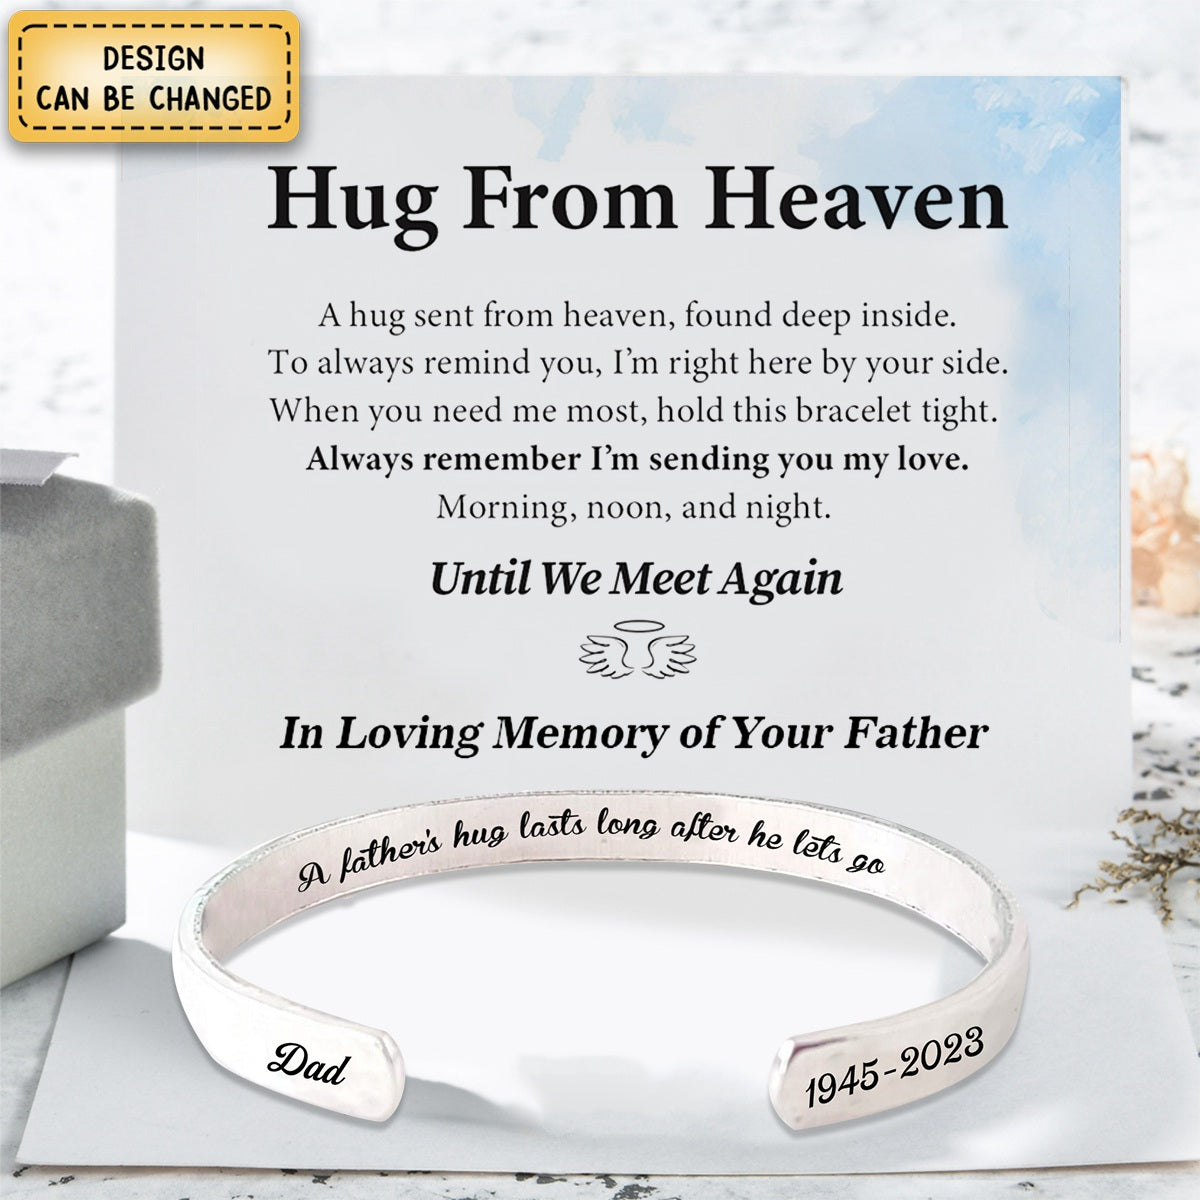 A father's hug lasts long after he lets go - Personalized Engraved Bracelet